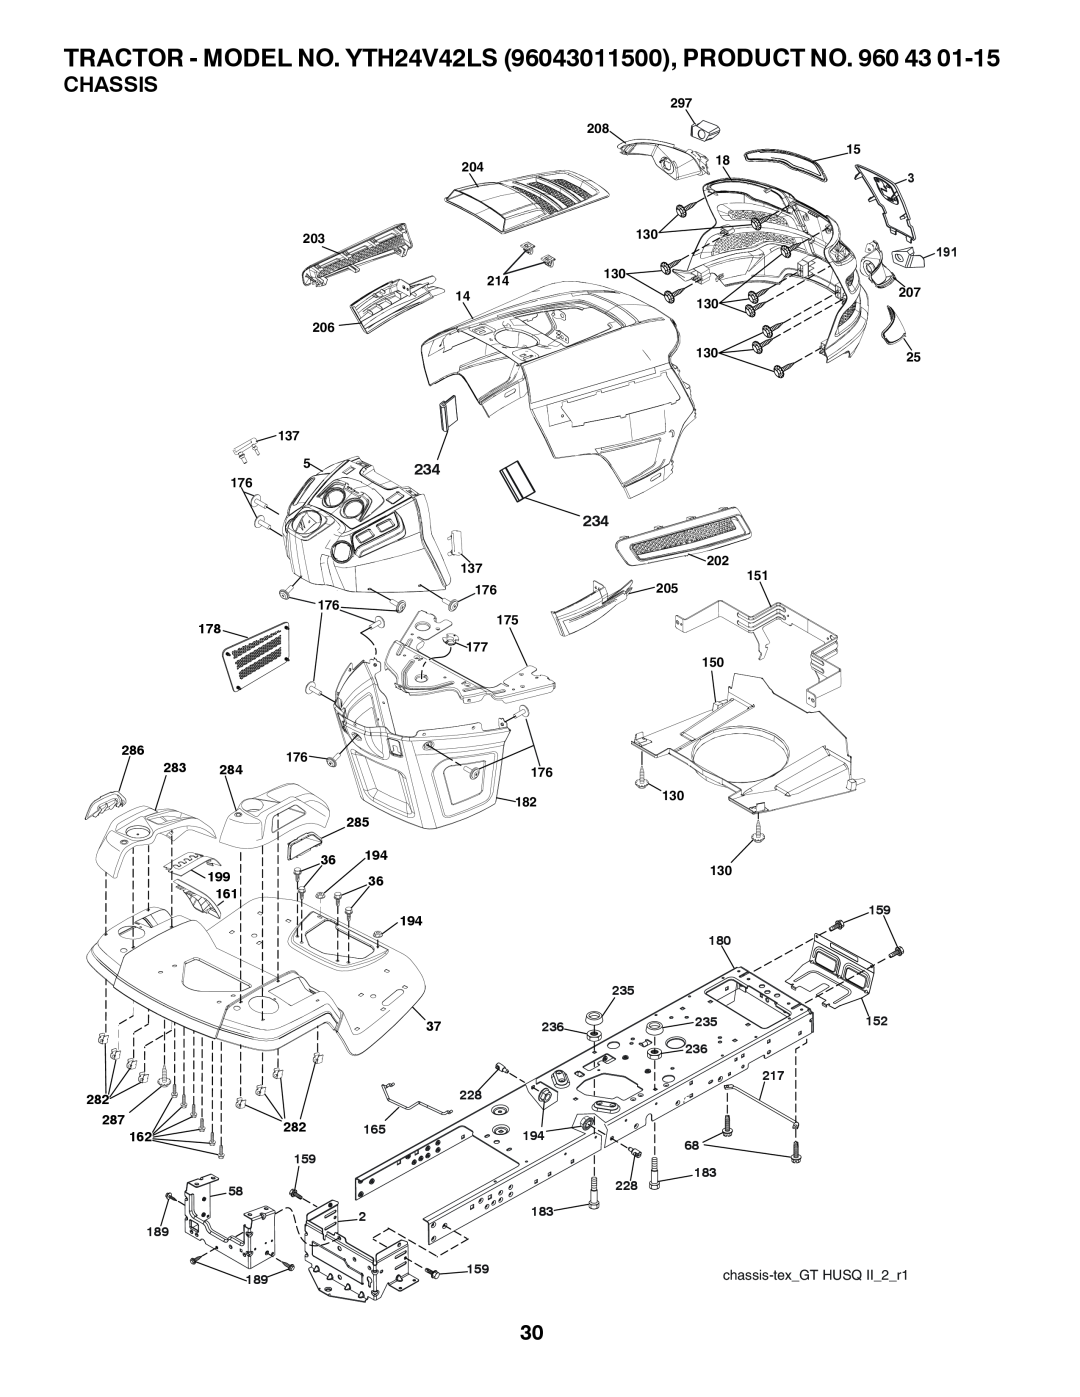 Husqvarna owner manual Chassis, TRACTOR - MODEL NO. YTH24V42LS 96043011500, PRODUCT NO. 960 43, chassis-texGT HUSQ II2r1 